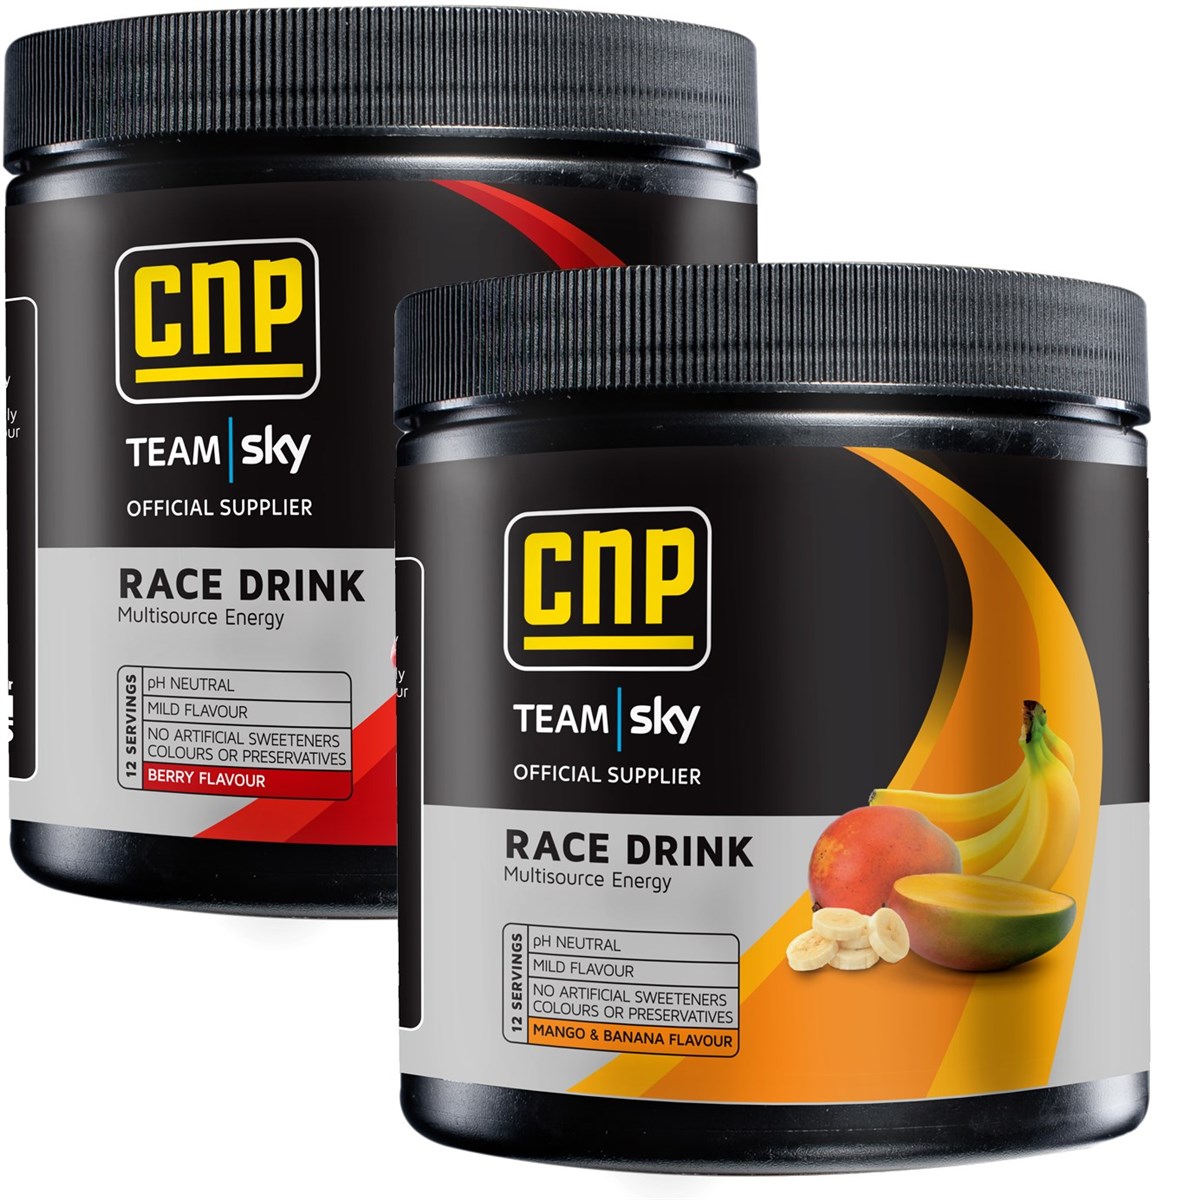 CNP Race Drink Multisource Energy Powder Drink - 1 x 264g Tub product image